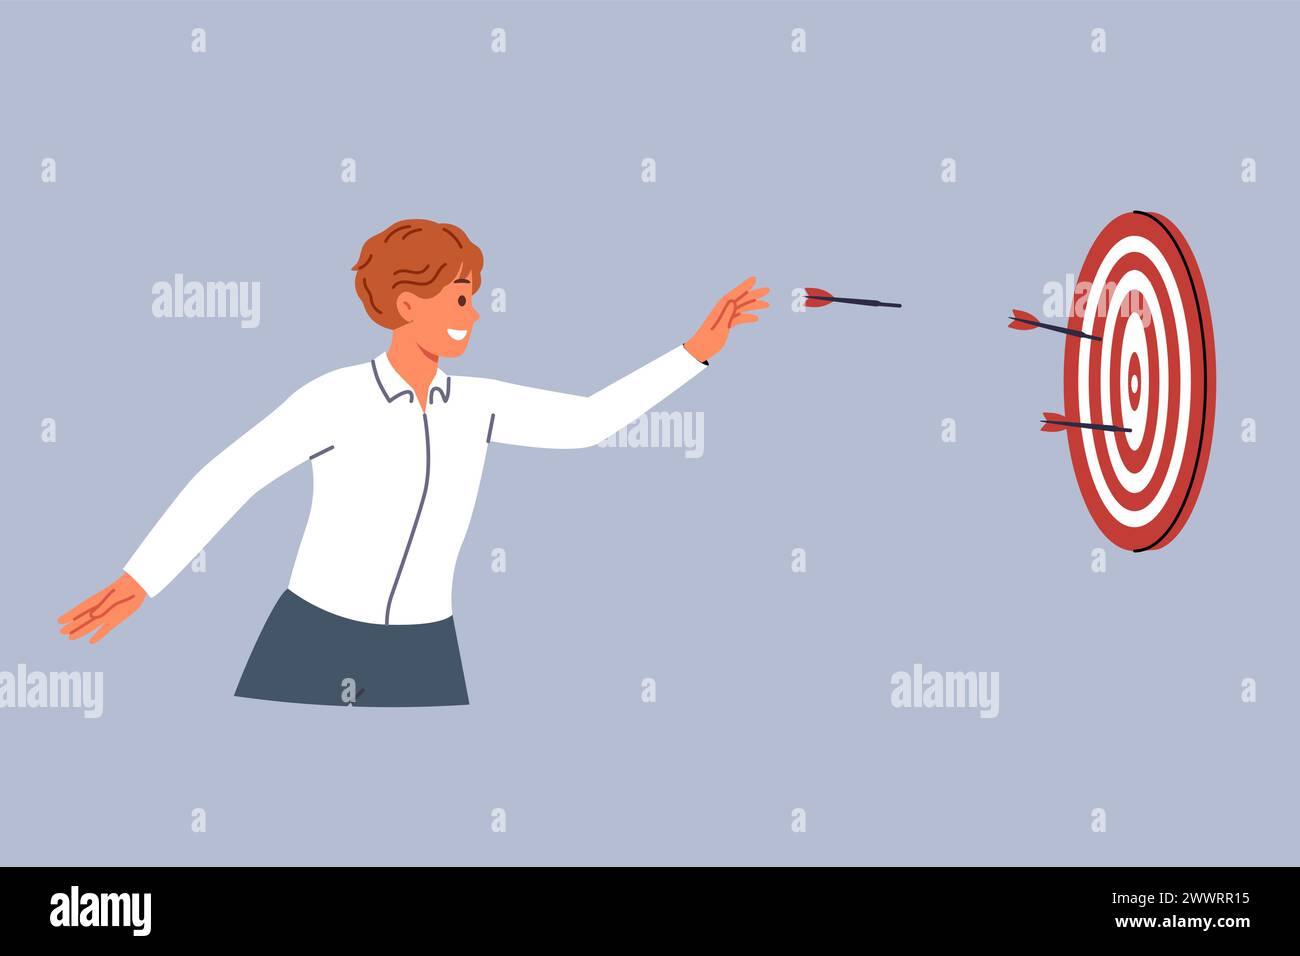 Business man is trying to hit target and achieve desired result by throwing darts at dartboard Stock Vector